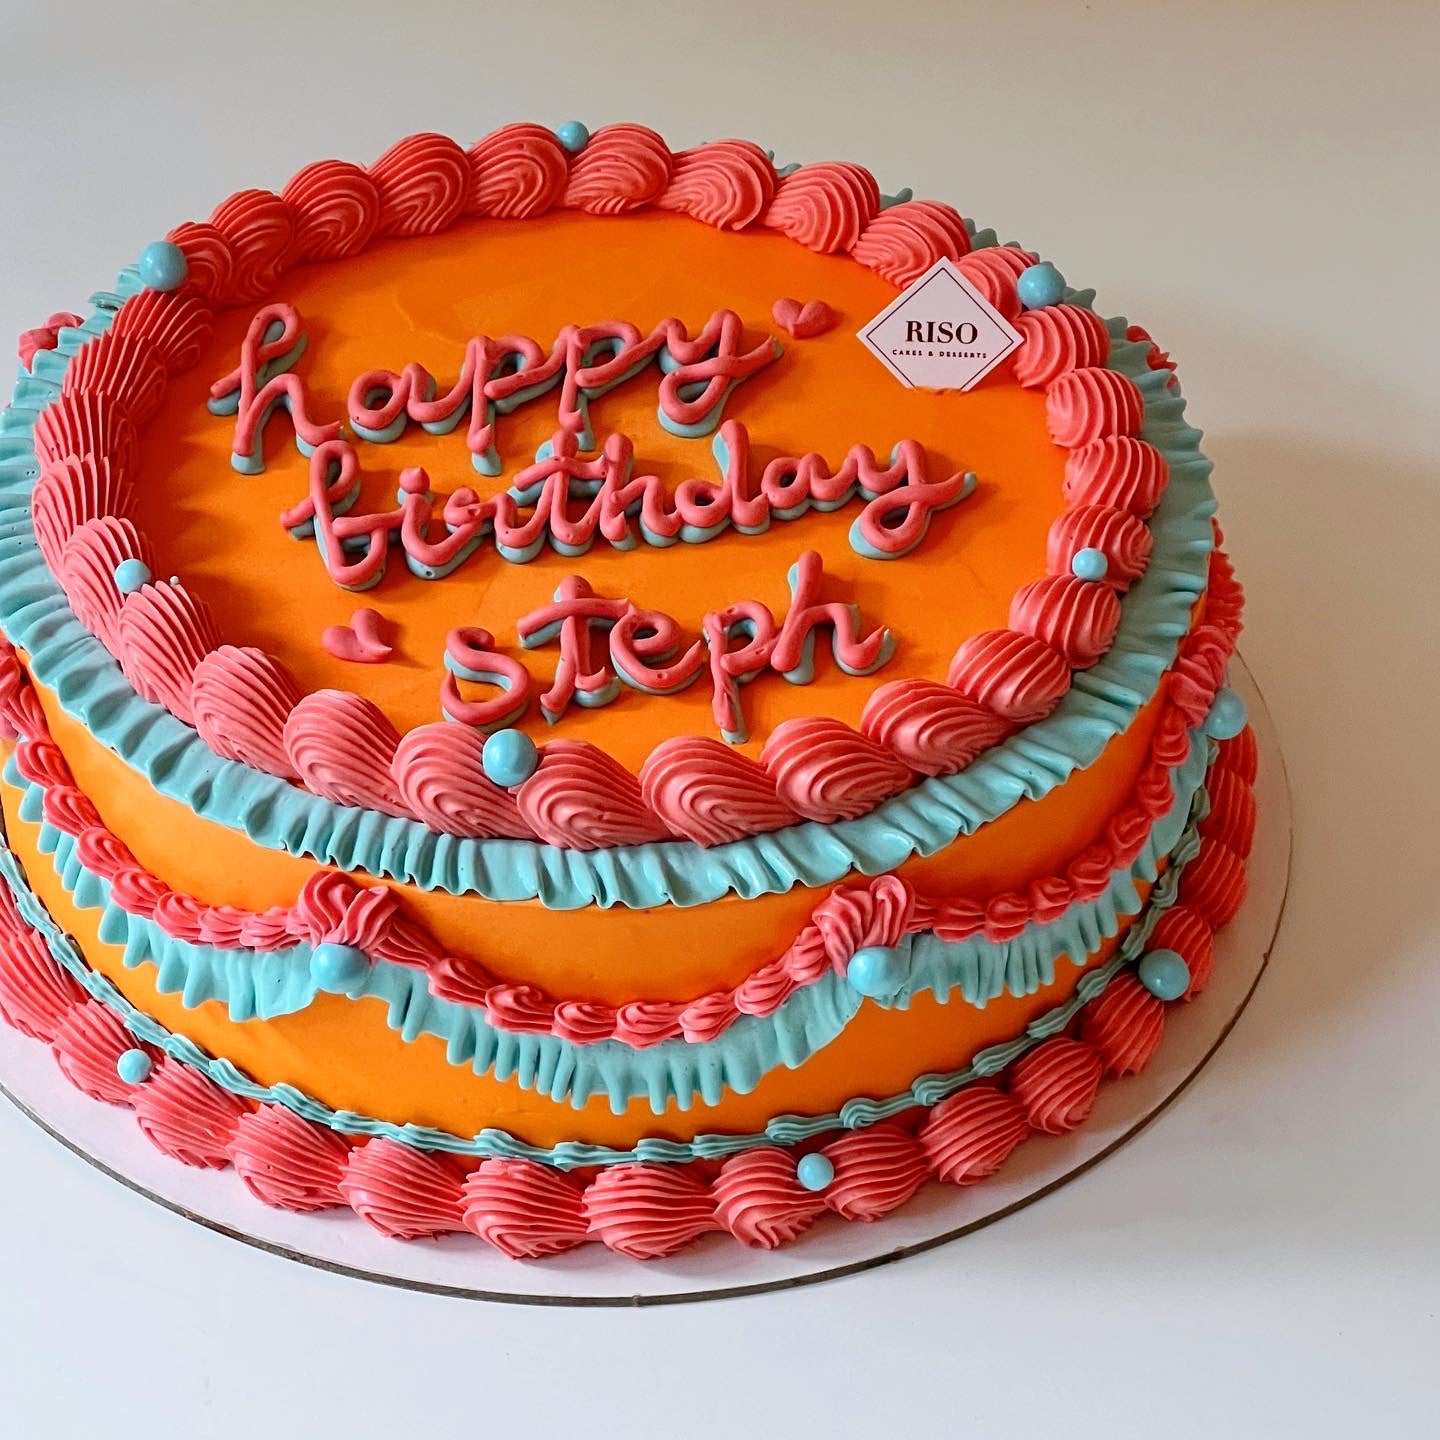 These Retro-Style Cakes Are All The Rage Right Now